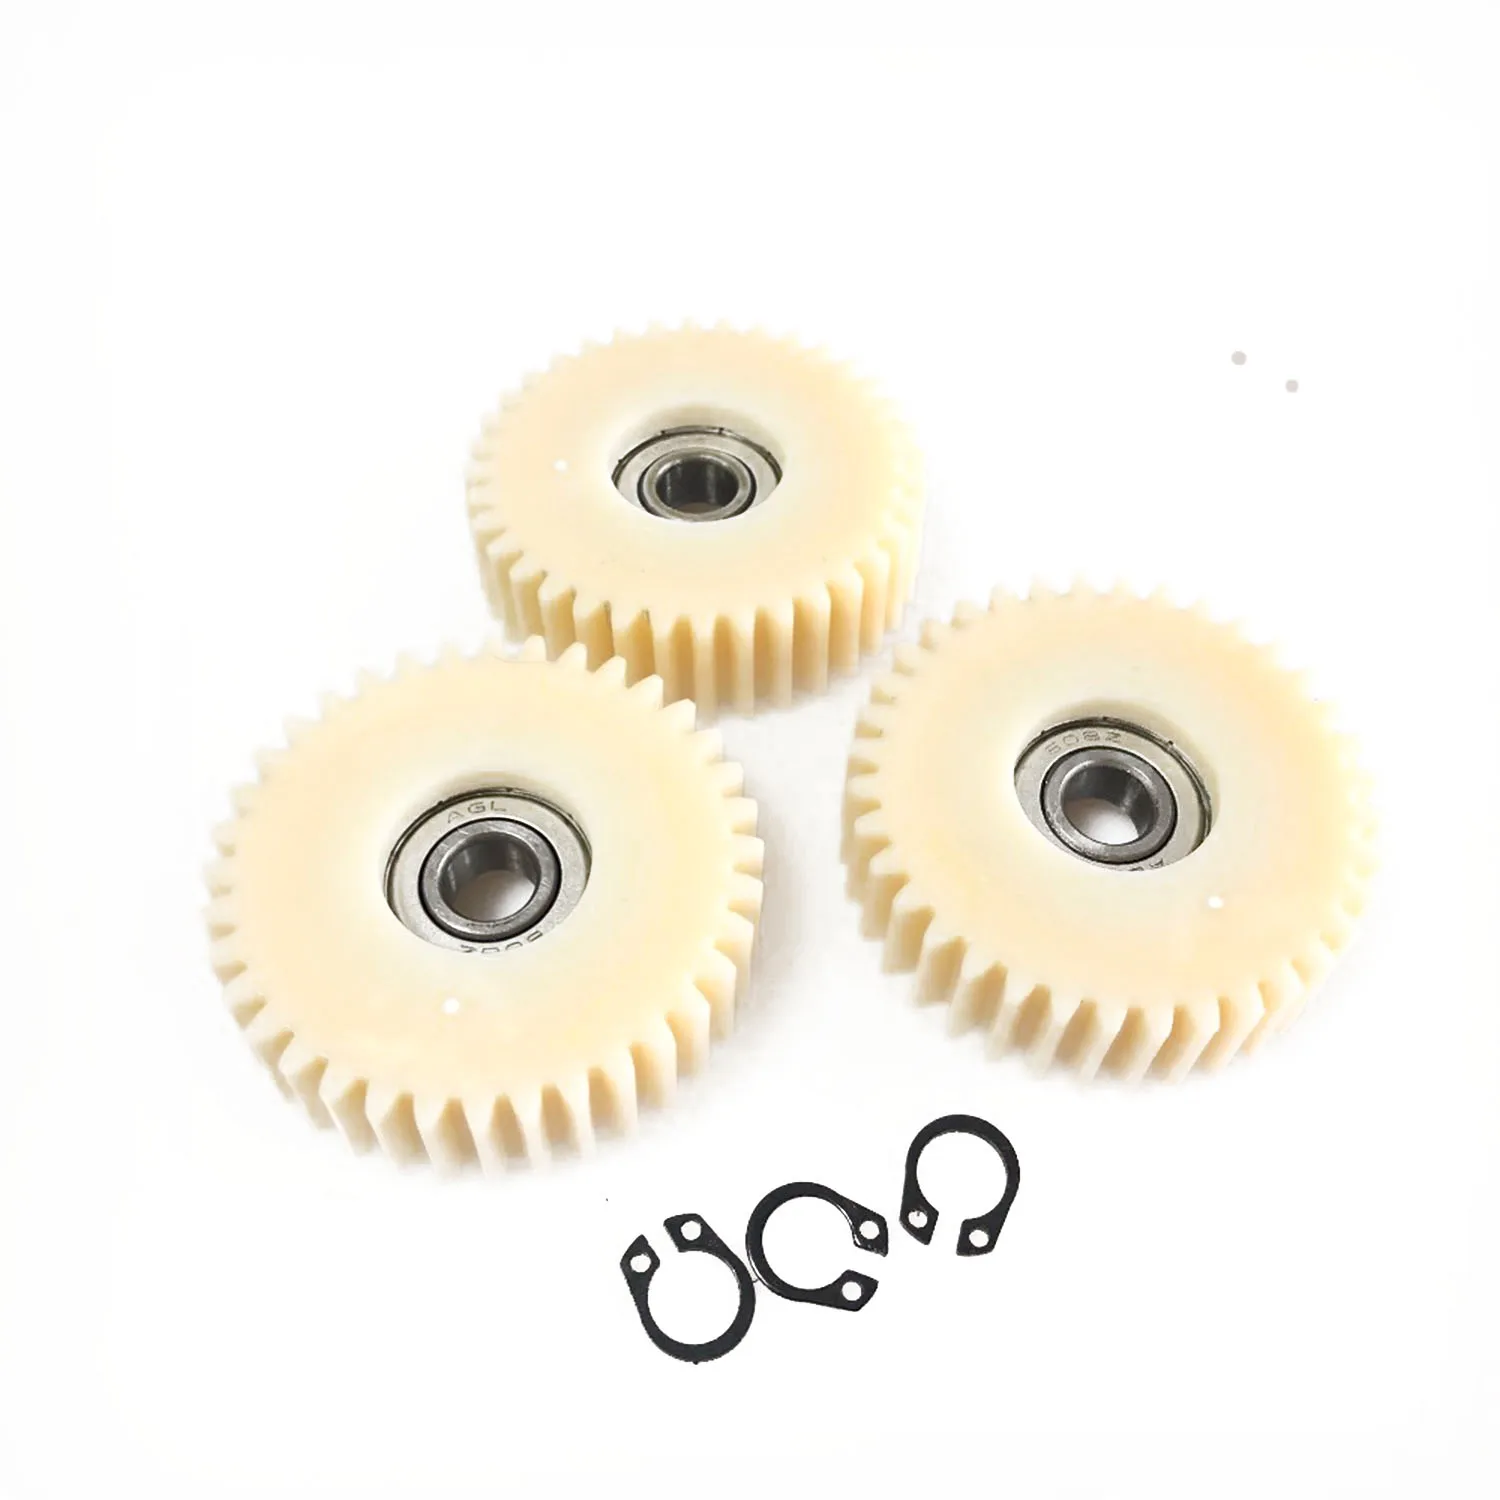 Bafang Motor SWX02(G02)/FAT Hub(G06) Nylon Gear set Spare Part for Replacement 36 Teeth Geared 3PCS with Circlip Ring